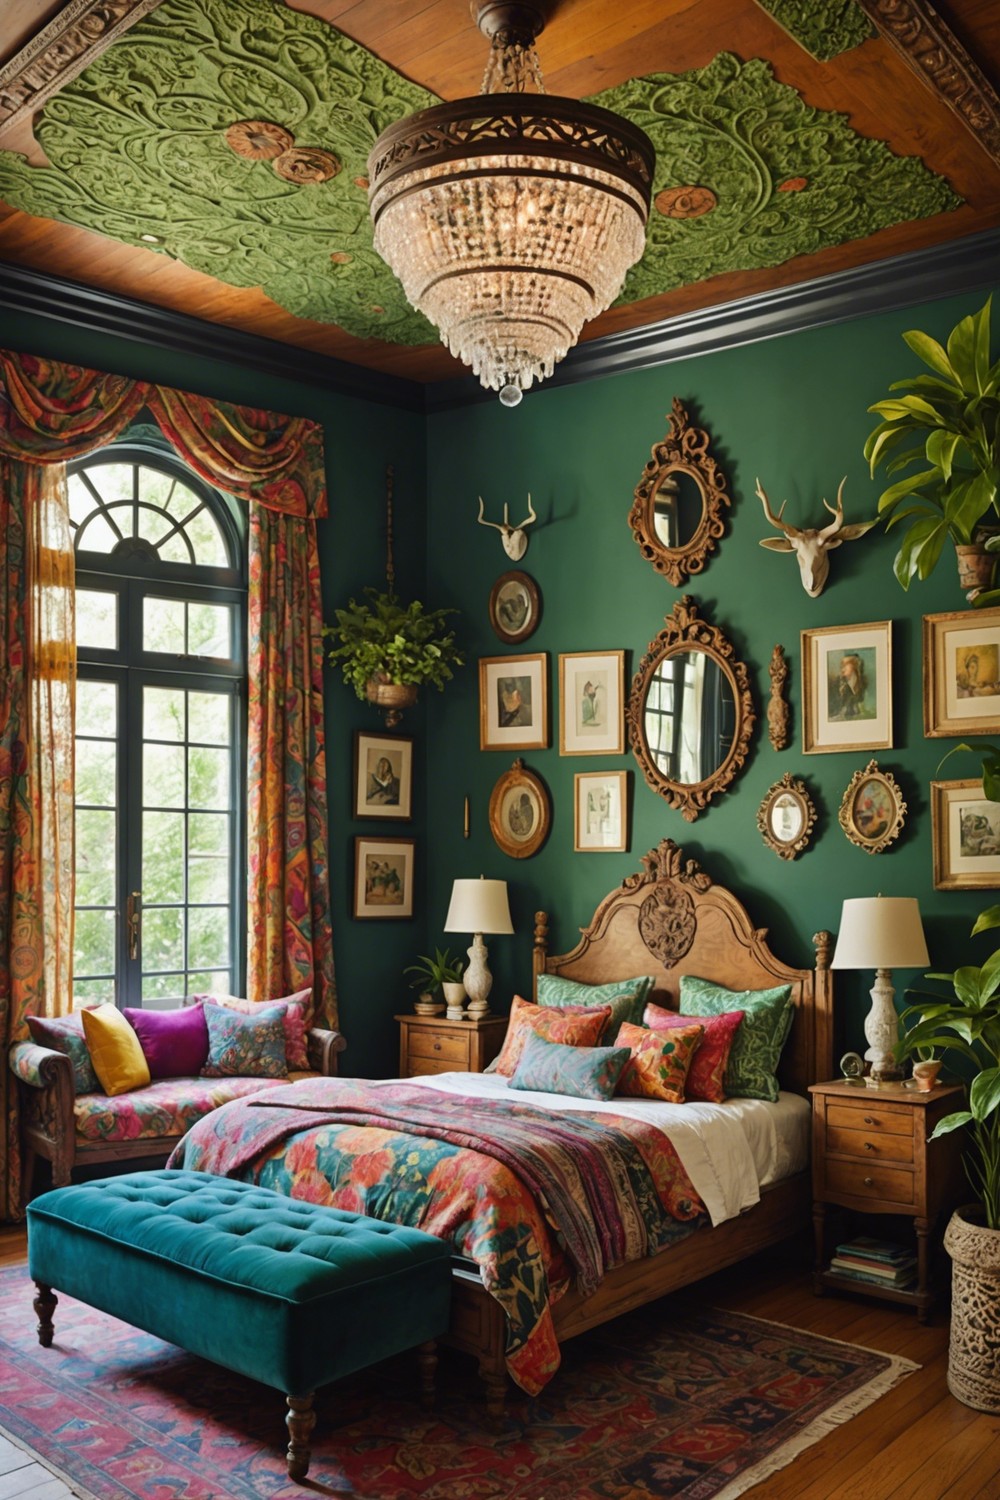 Fancy Free: A Whimsical, Eclectic Bedroom